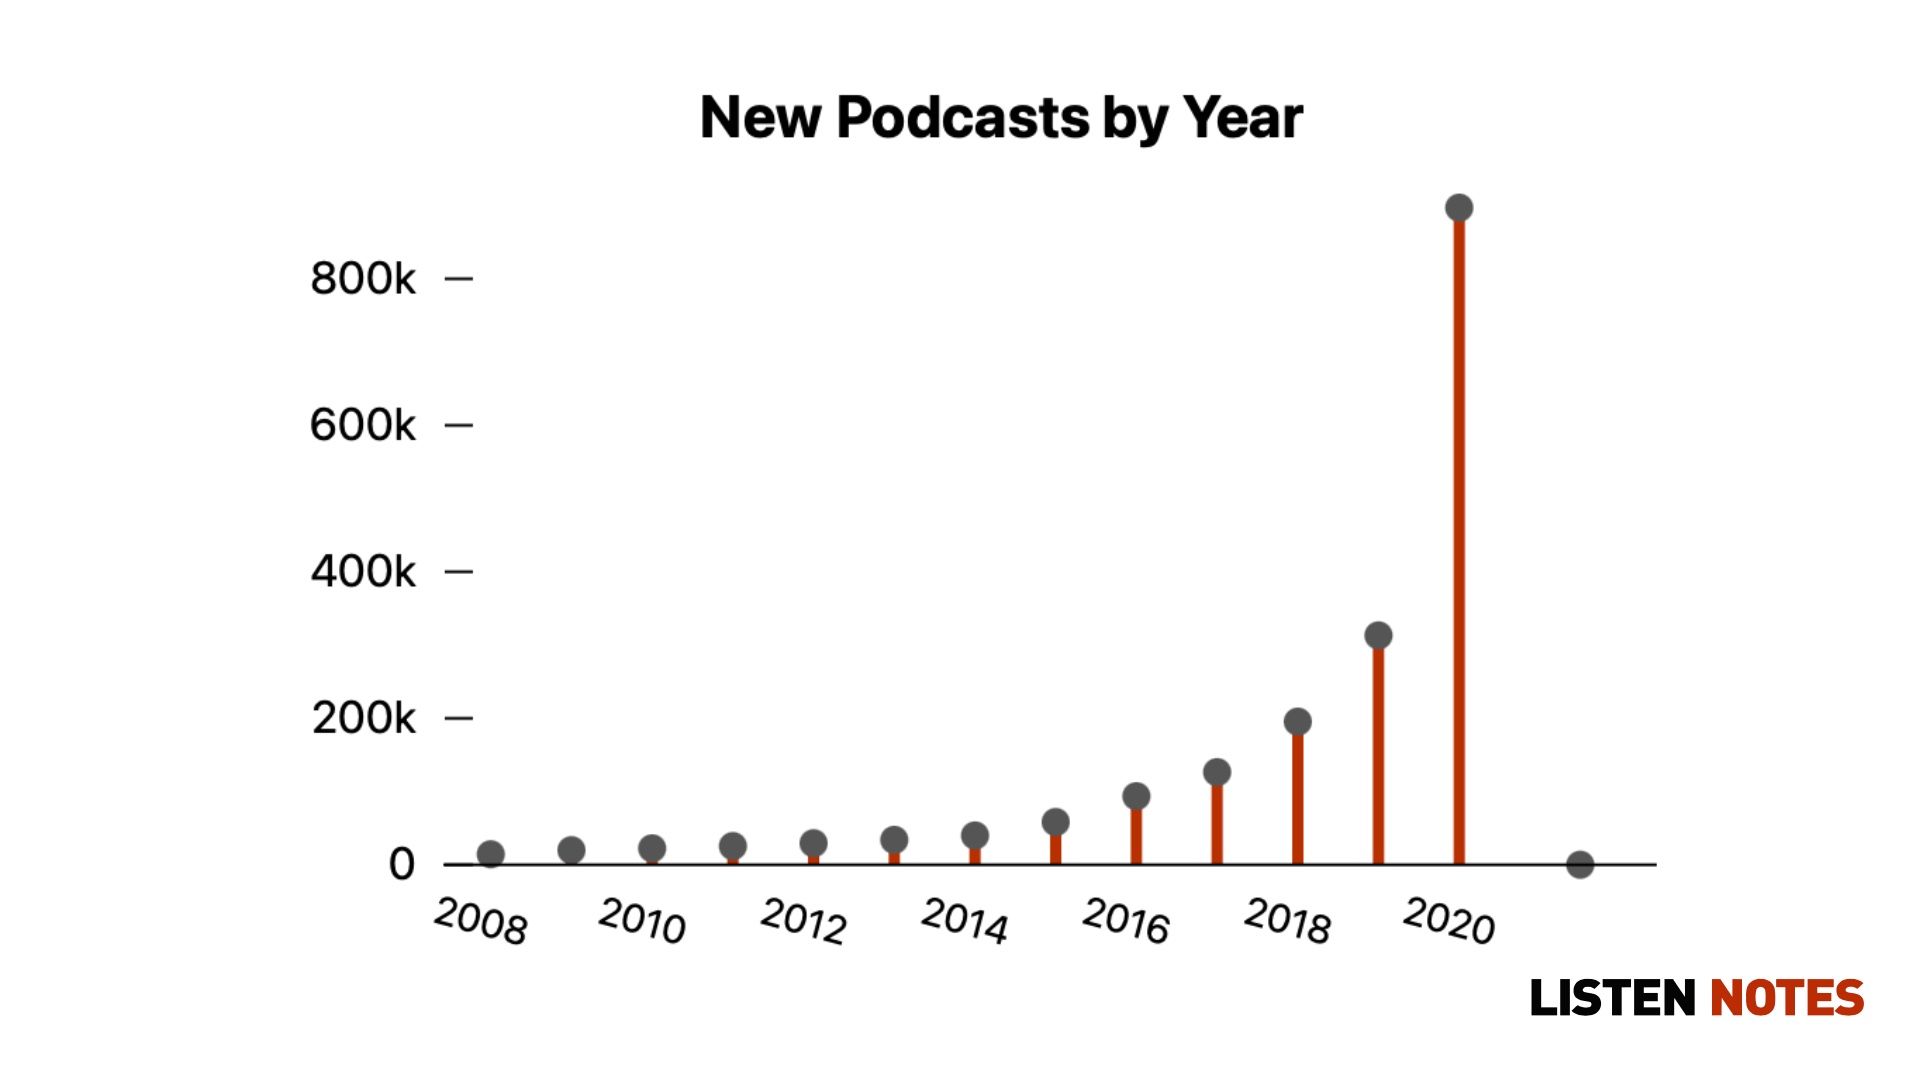 New podcasts grew 187% in 2020